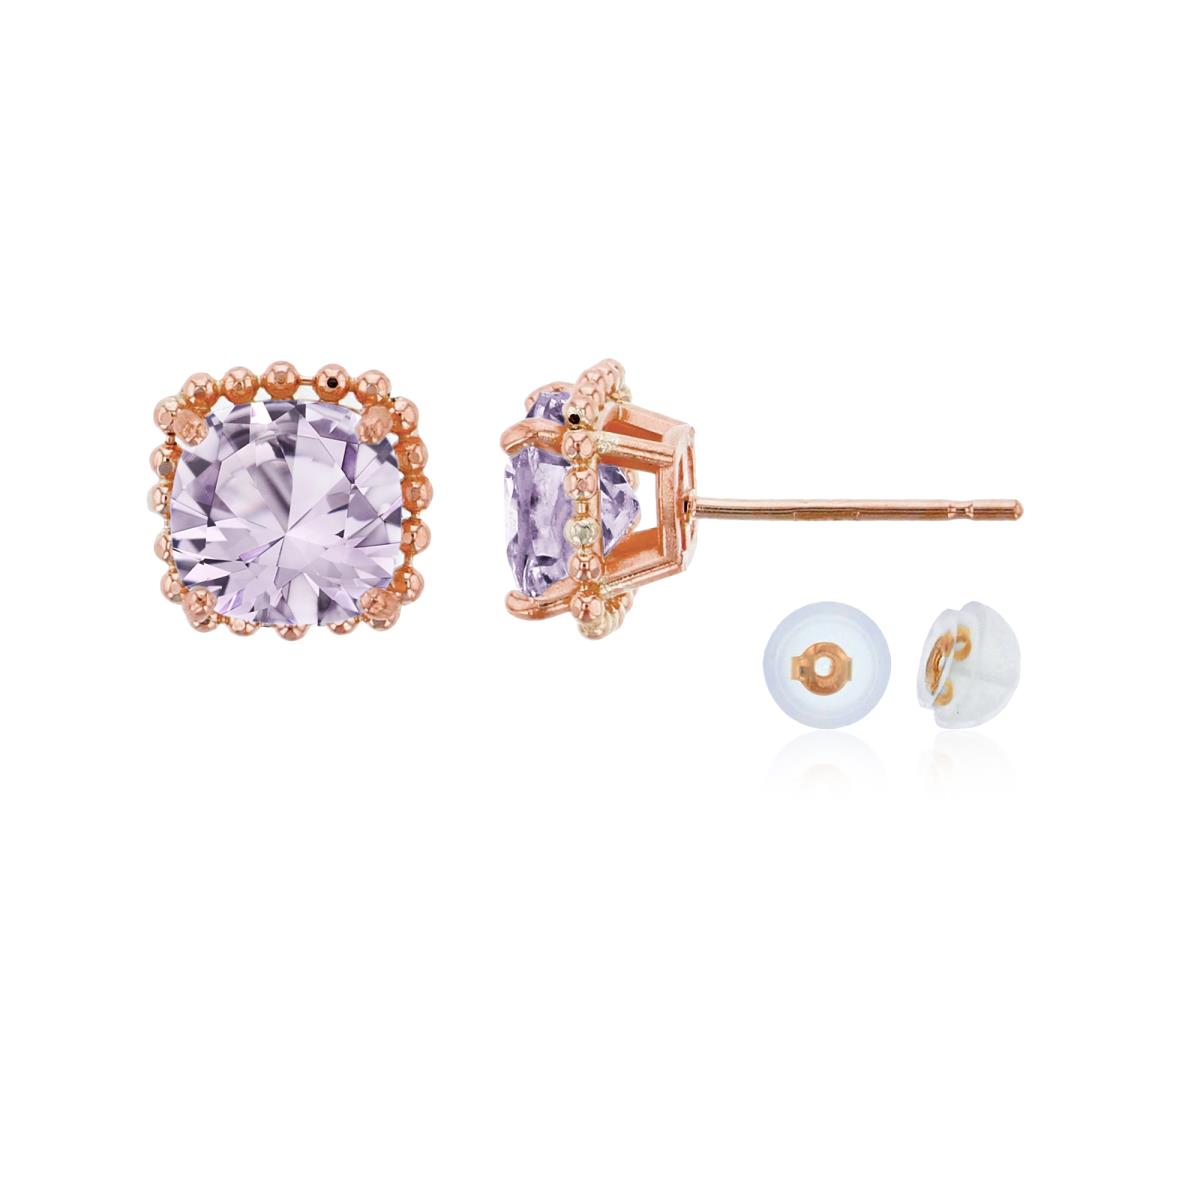 10K Rose Gold 6x6mm Cushion Cut Rose De France Bead Frame Stud Earring with Silicone Back